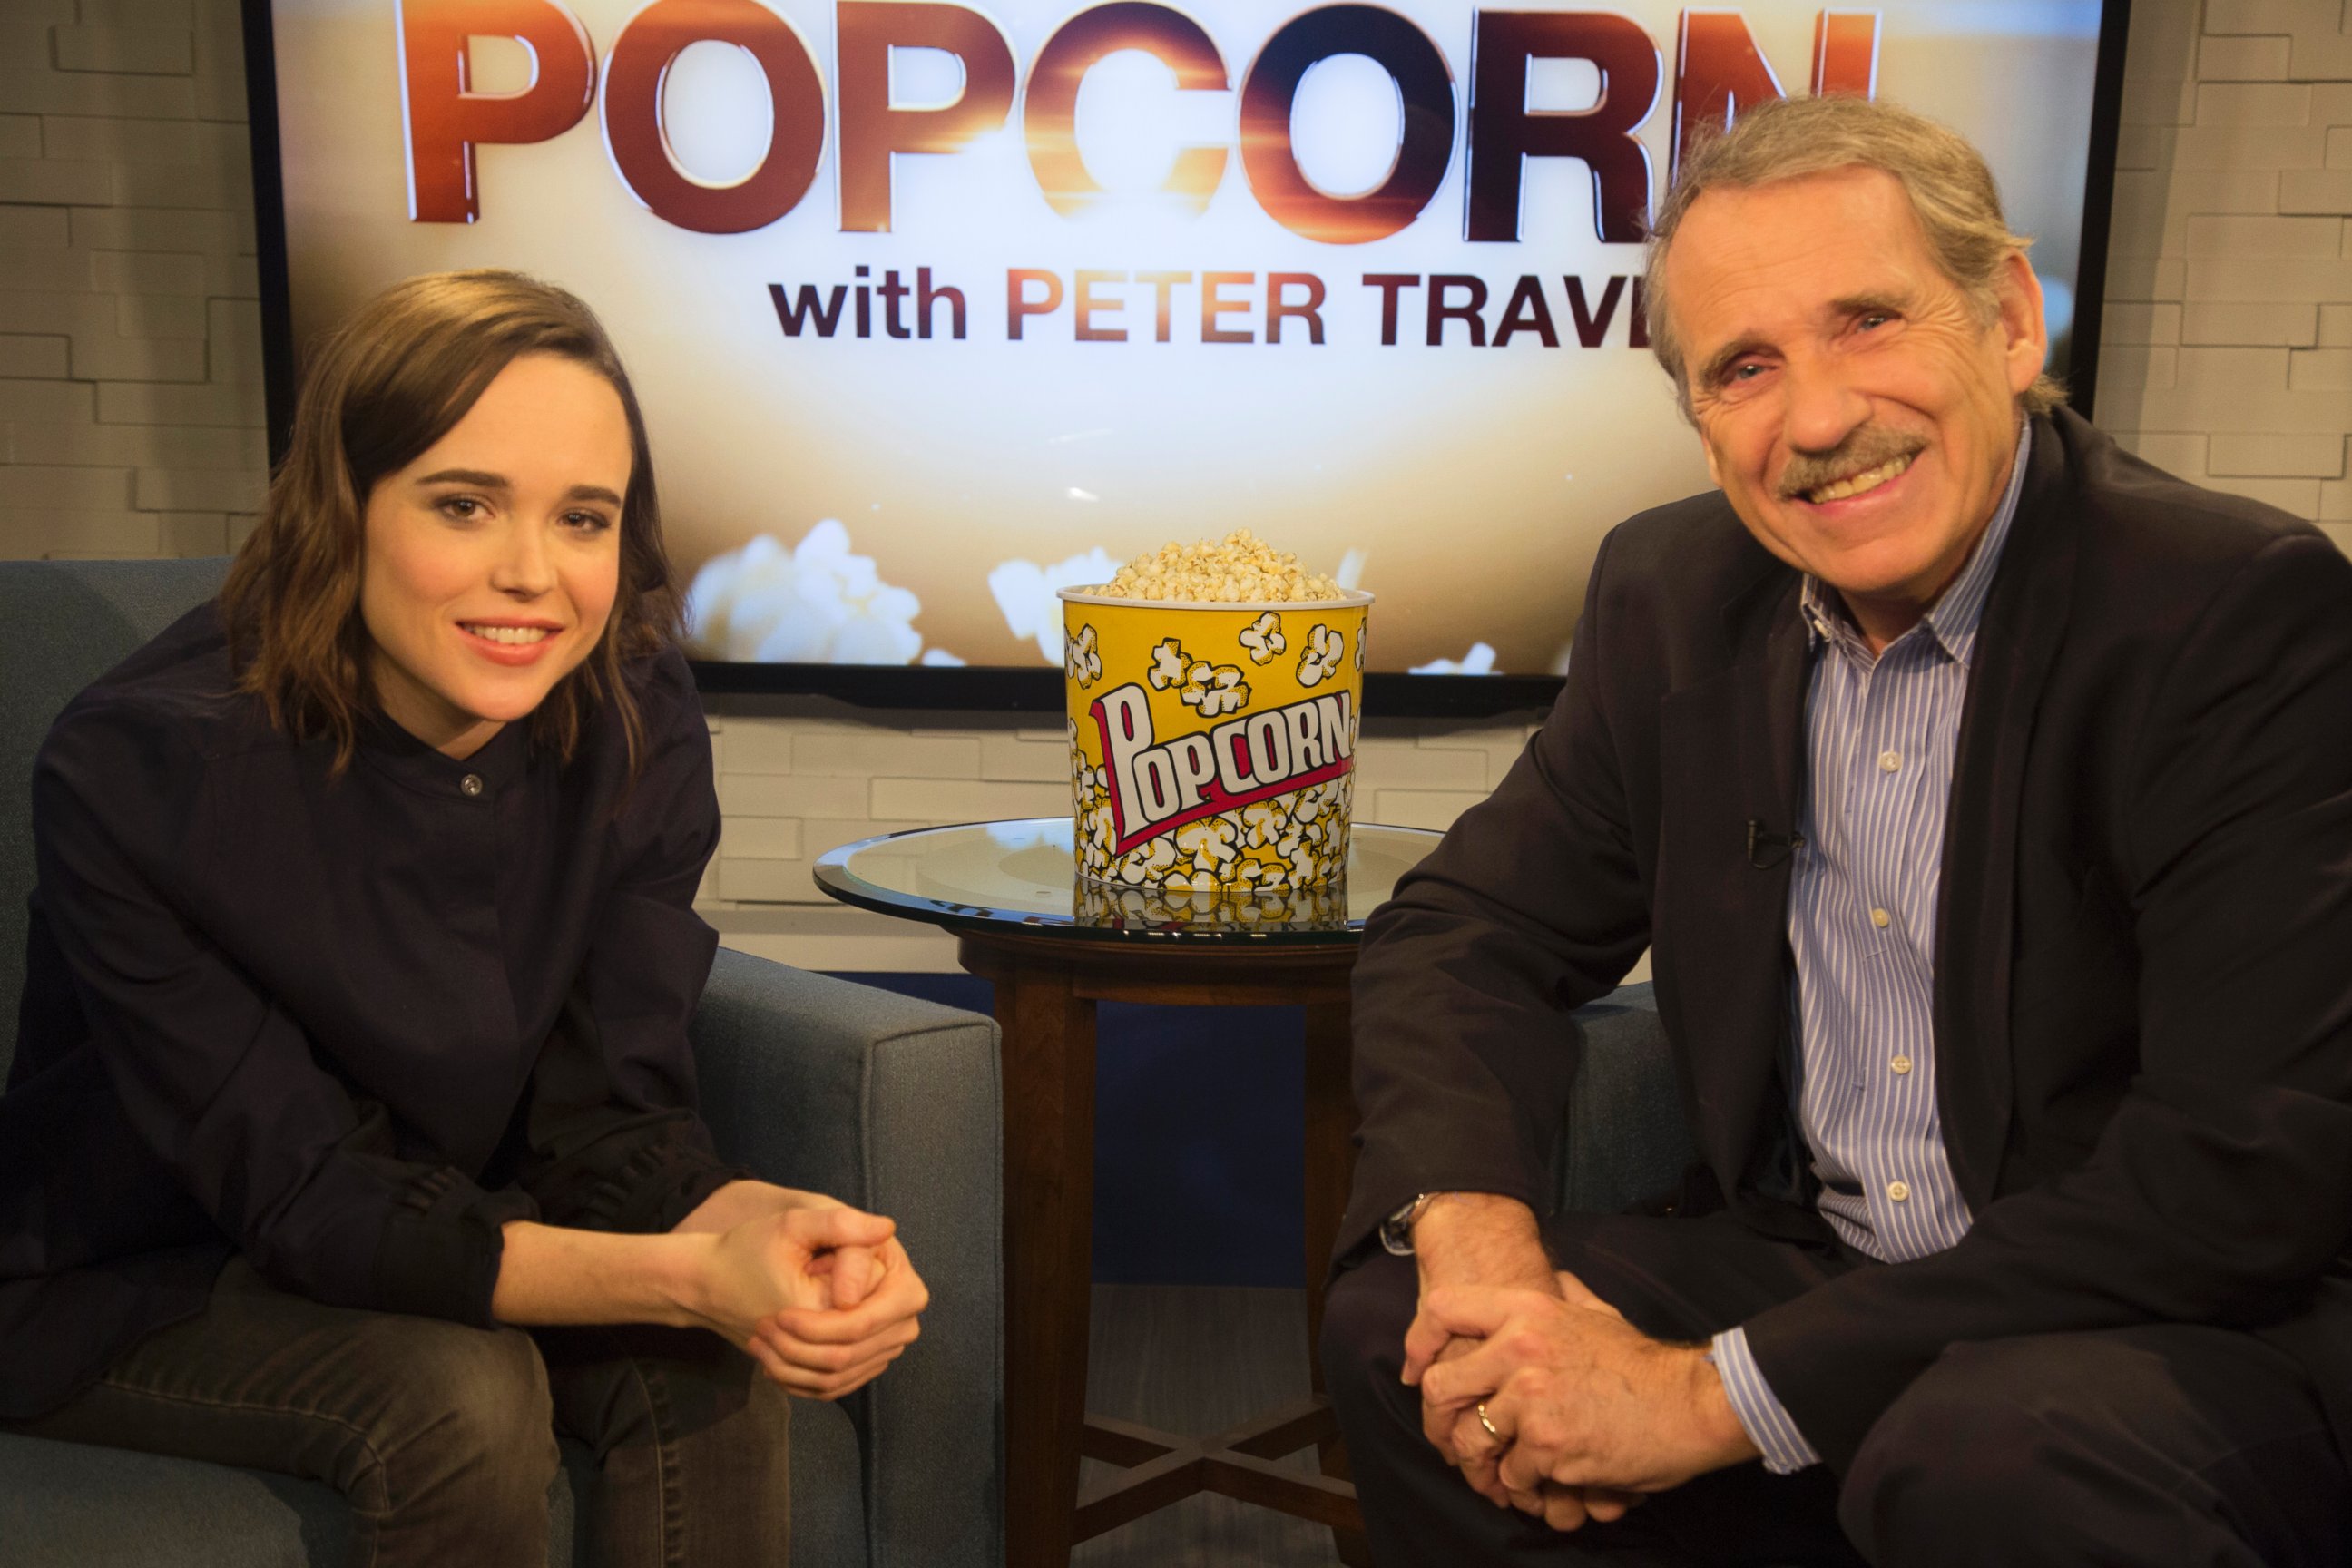 PHOTO: Ellen Page and Peter Travers on the set of 'Popcorn with Peter Travers'